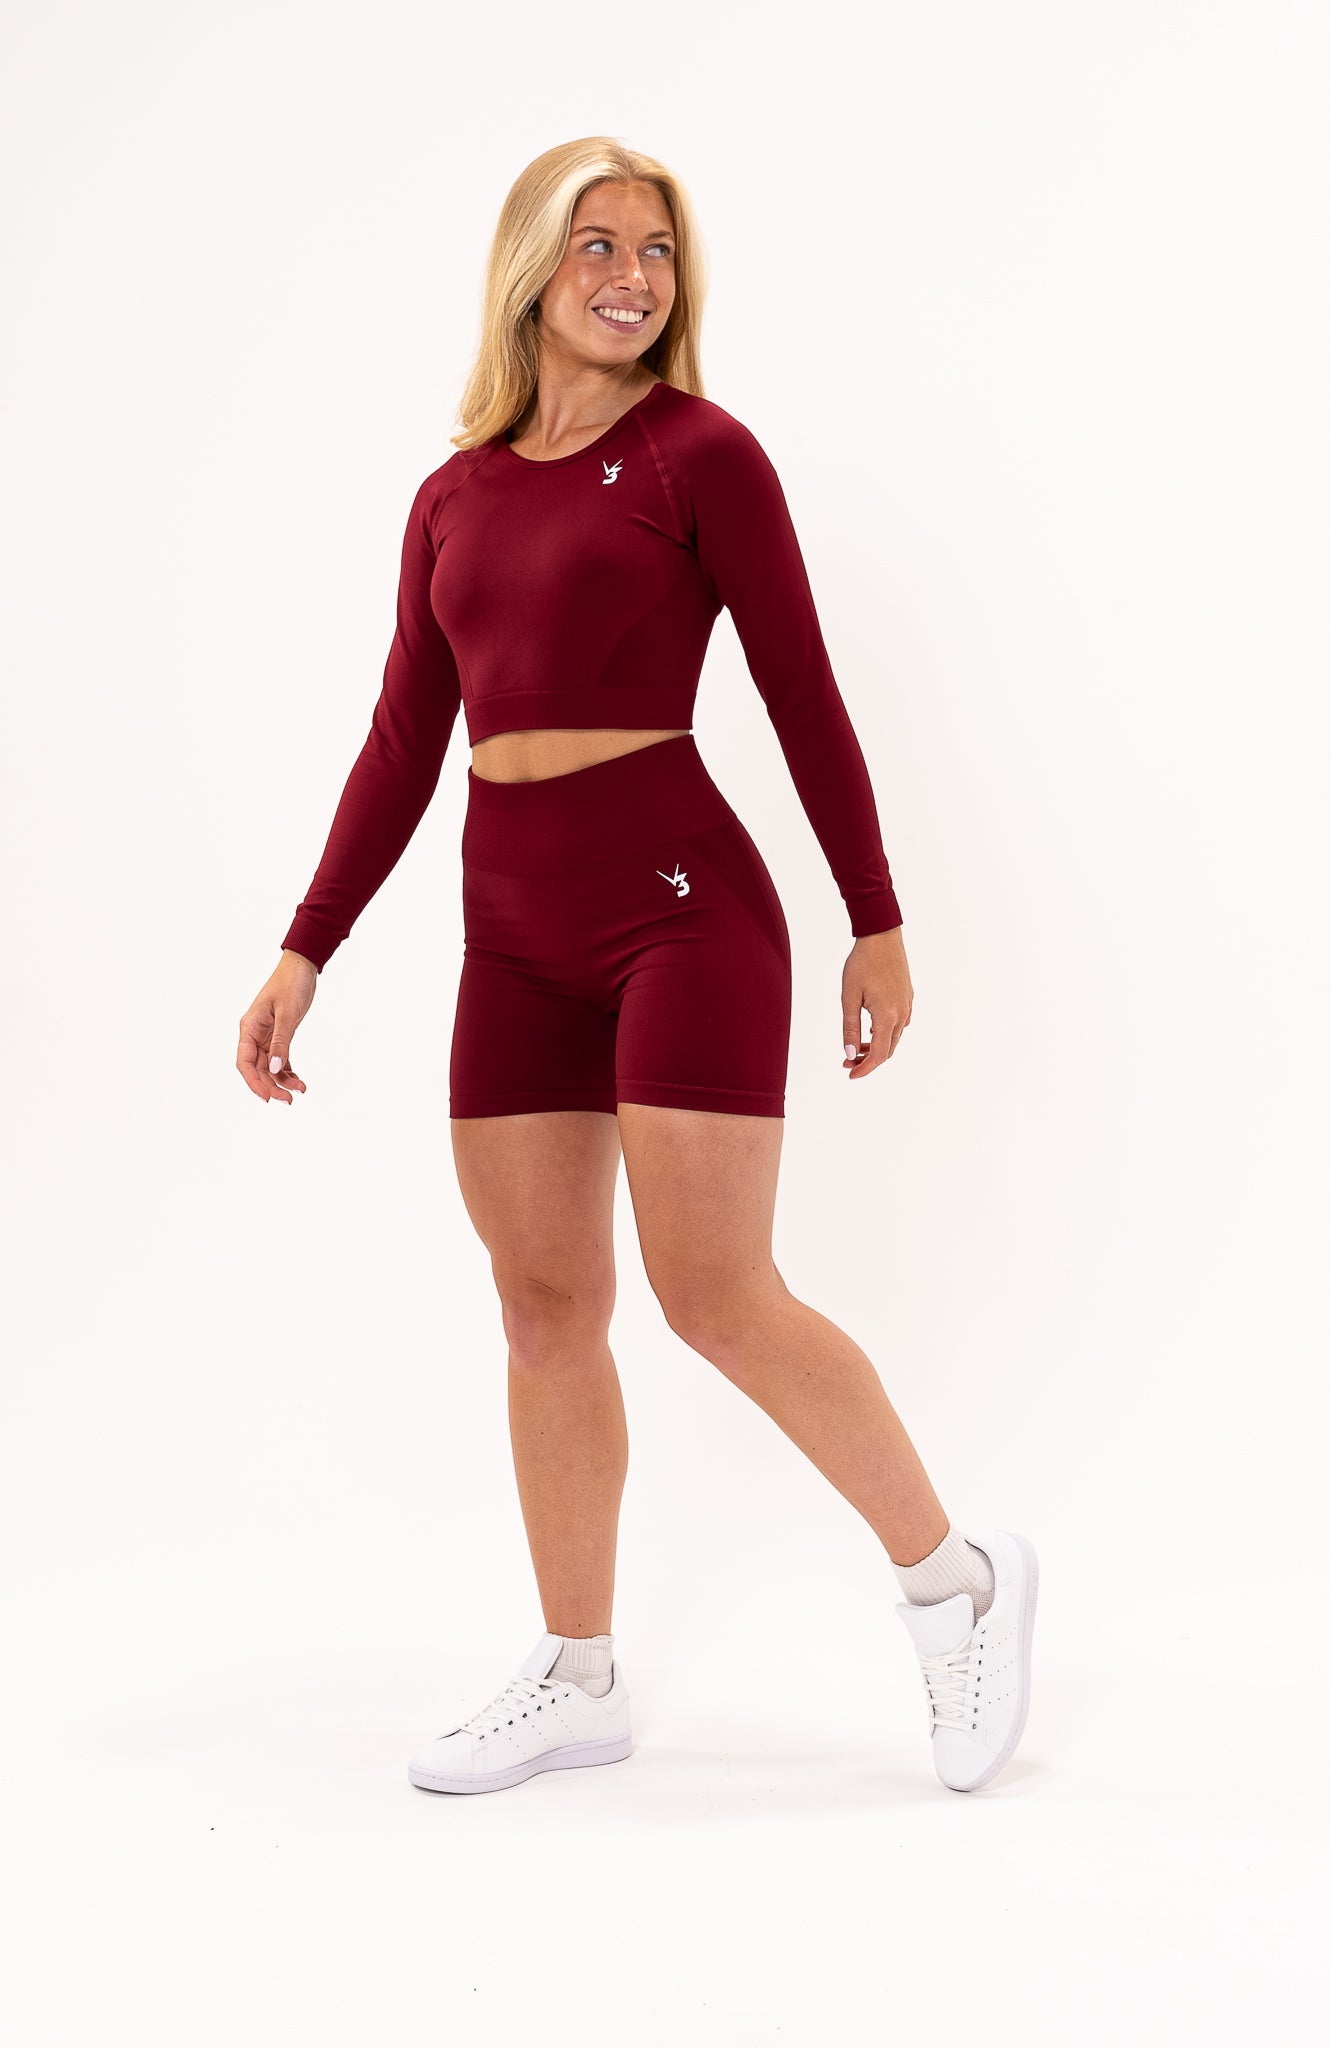 redbaysand Women's Tempo seamless long sleeve cropped training top in burgundy red with thumb hole long sleeves and crop fit for gym workouts training, Running, yoga, bodybuilding and bikini fitness.